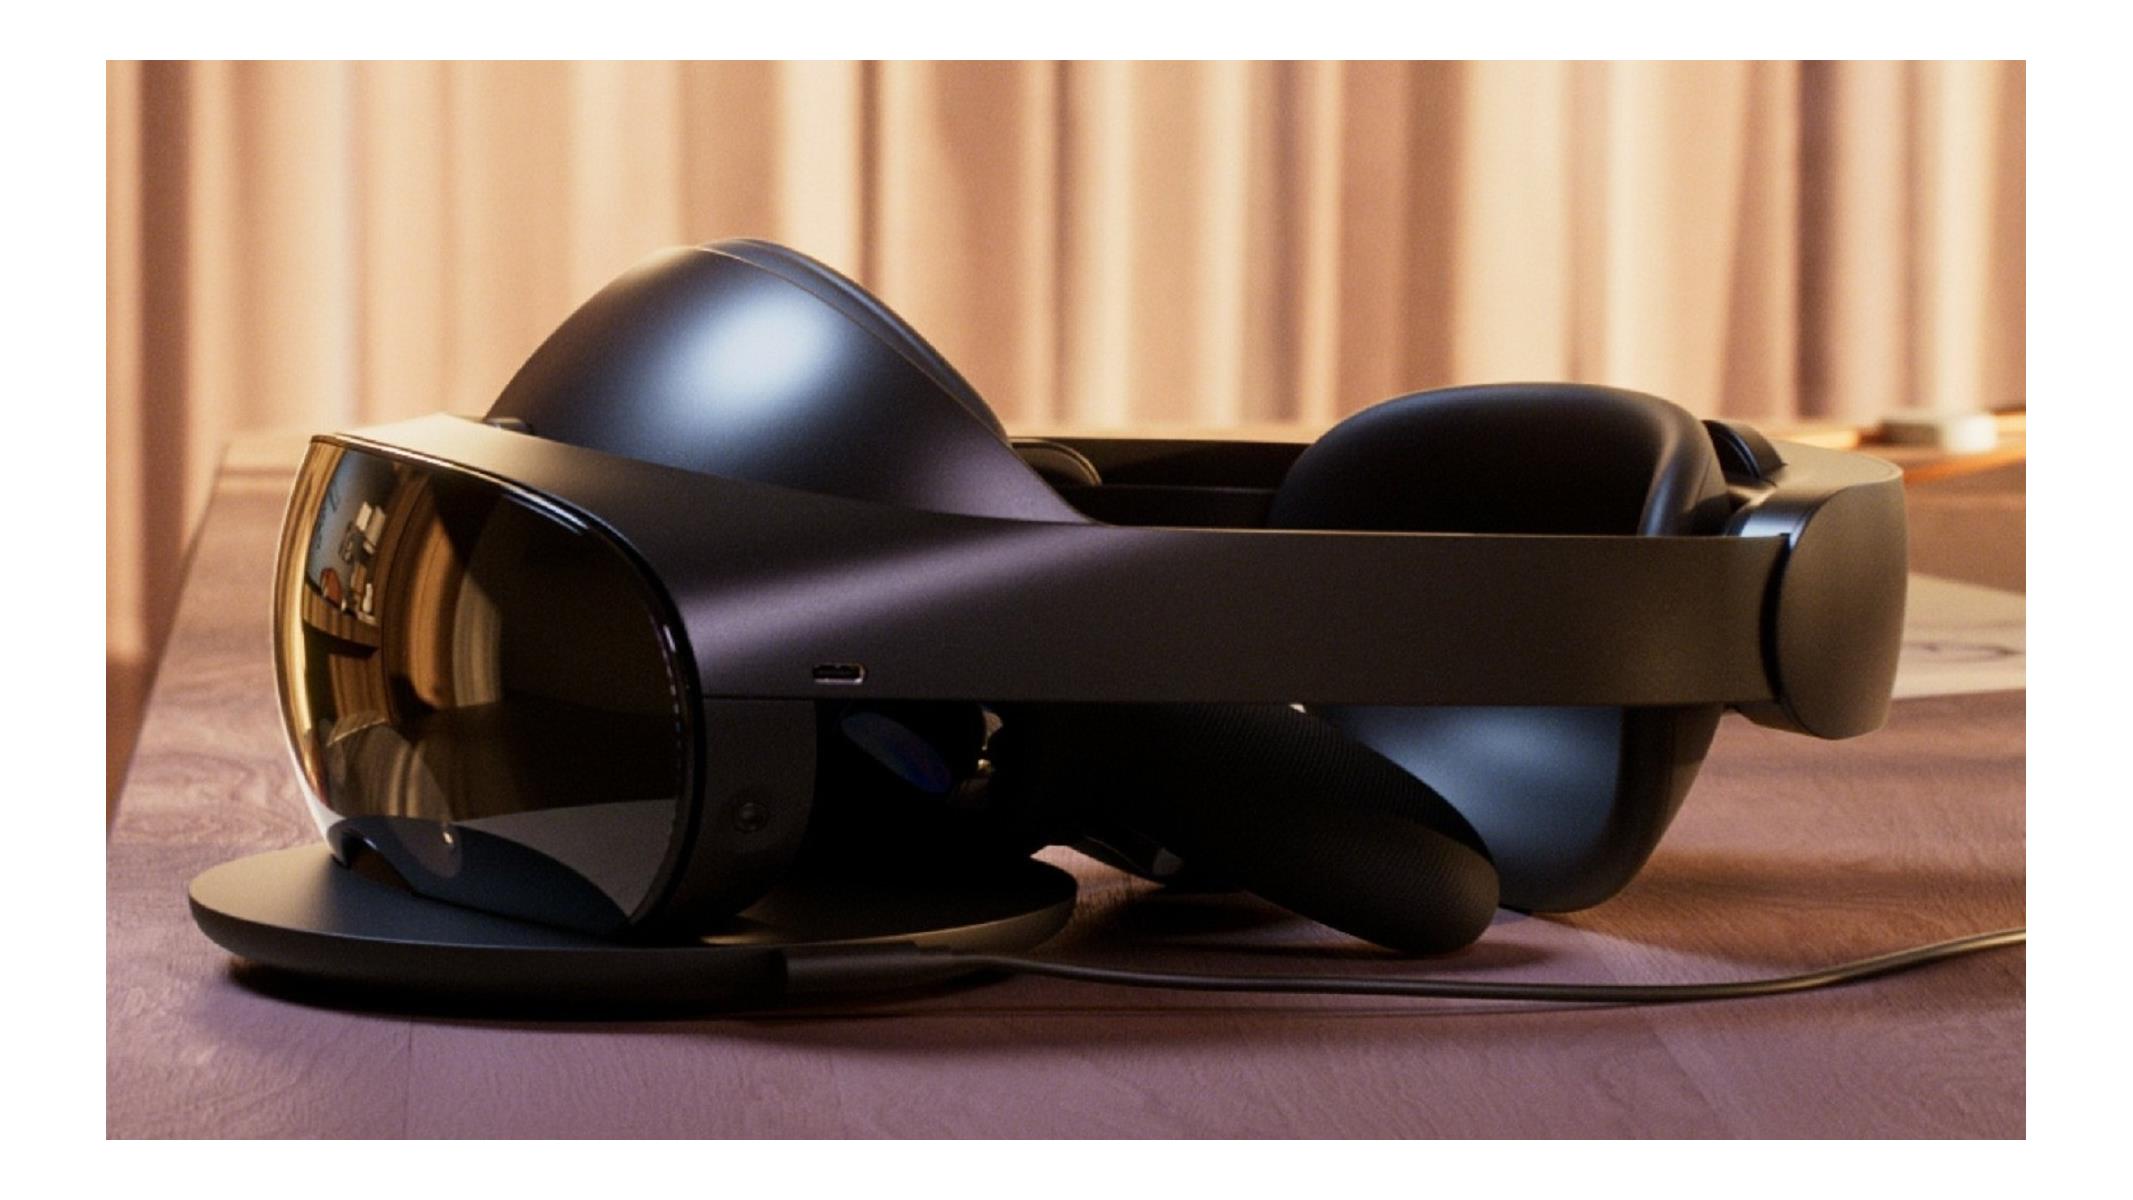 Meta Slashes Quest 2 And Quest Pro VR Headset Prices But Should You Pounce?